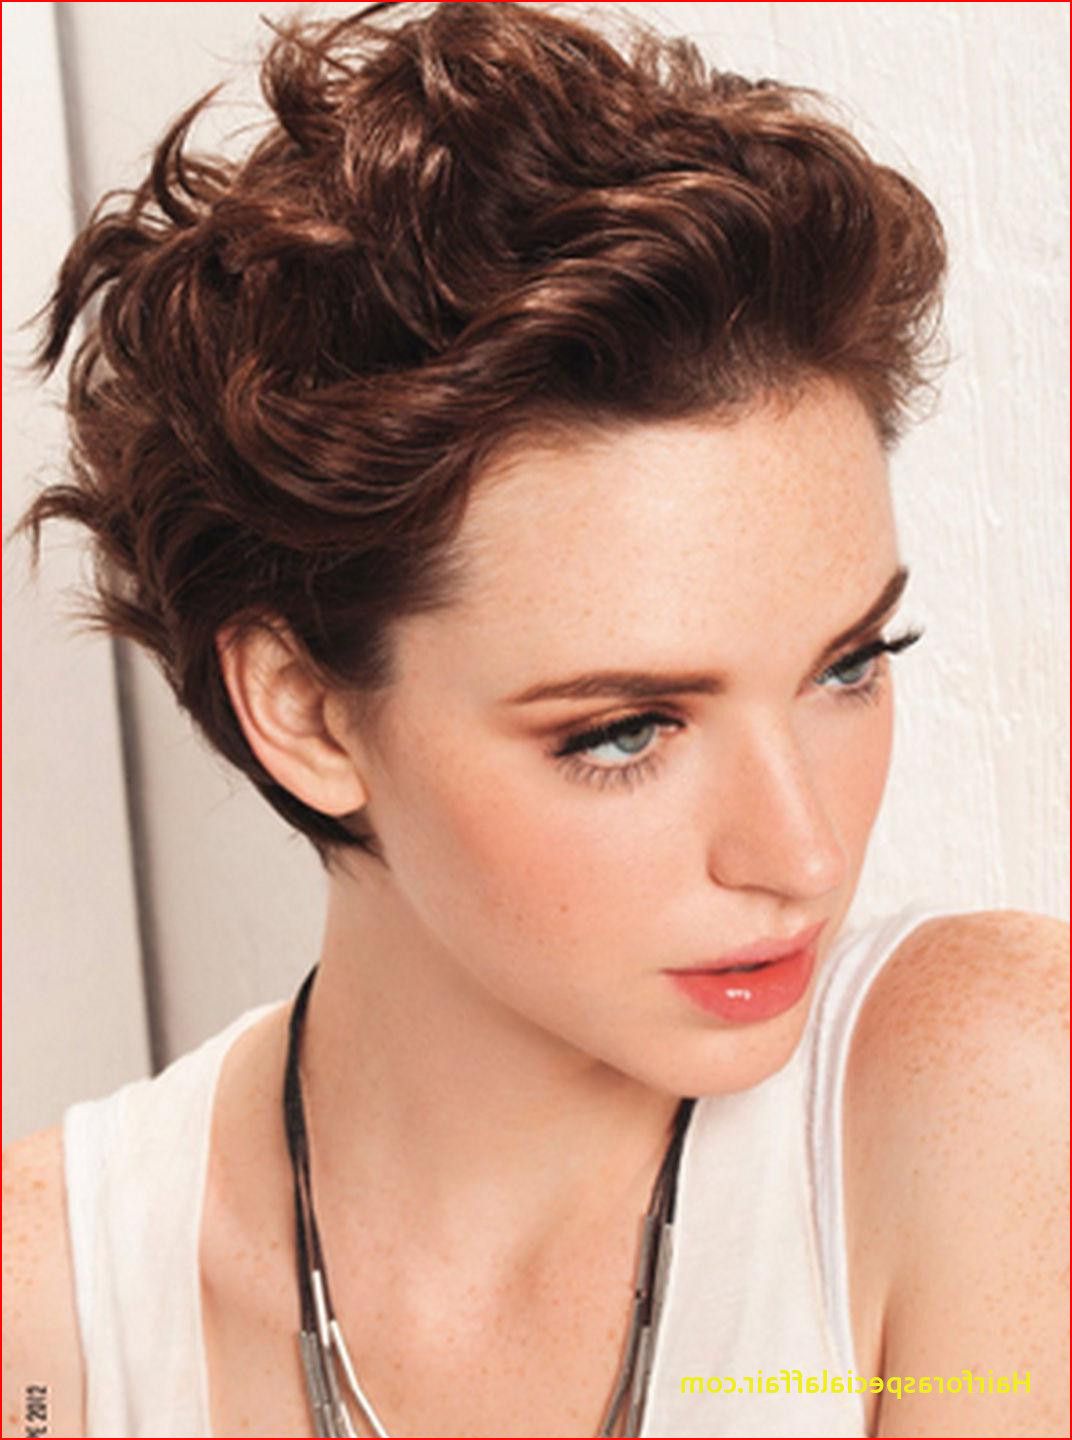 Short Haircuts For Women With Thick Wavy Hair Cute Short Haircuts Regarding Short Hairstyles Thick Wavy Hair (View 9 of 25)